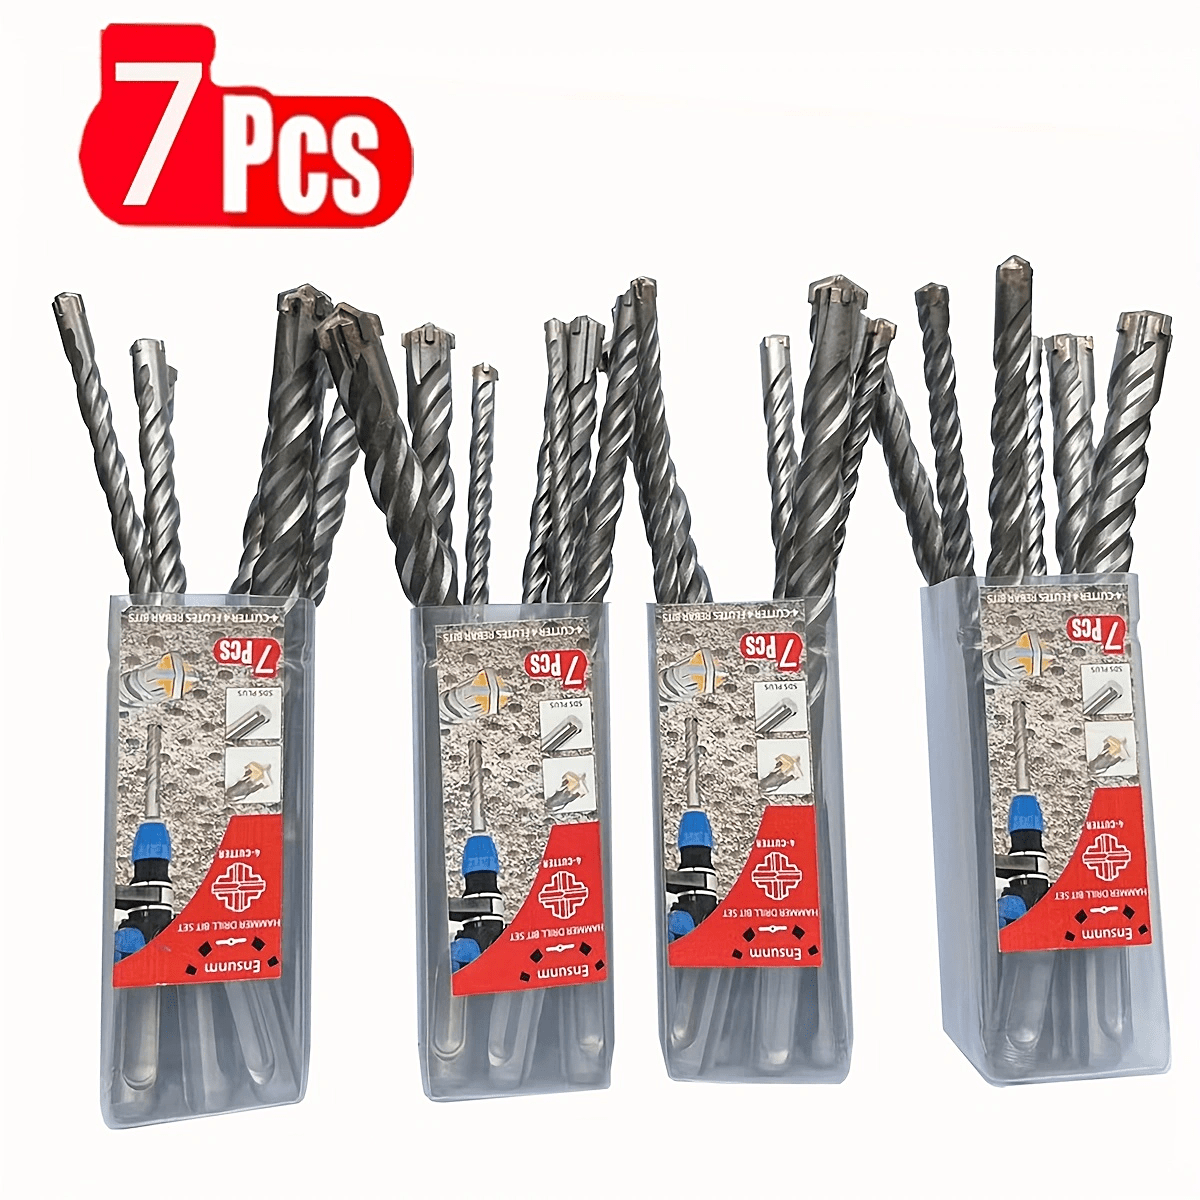 

7-piece Tungsten Steel Sds Plus Drill Bit Set, Grey, Phillips Head, Metal Surface, No Assembly, Home Decor Use, Cross Head 4-blade For Masonry, Concrete, Brick, Stone - 5mm To 14mm Sizes